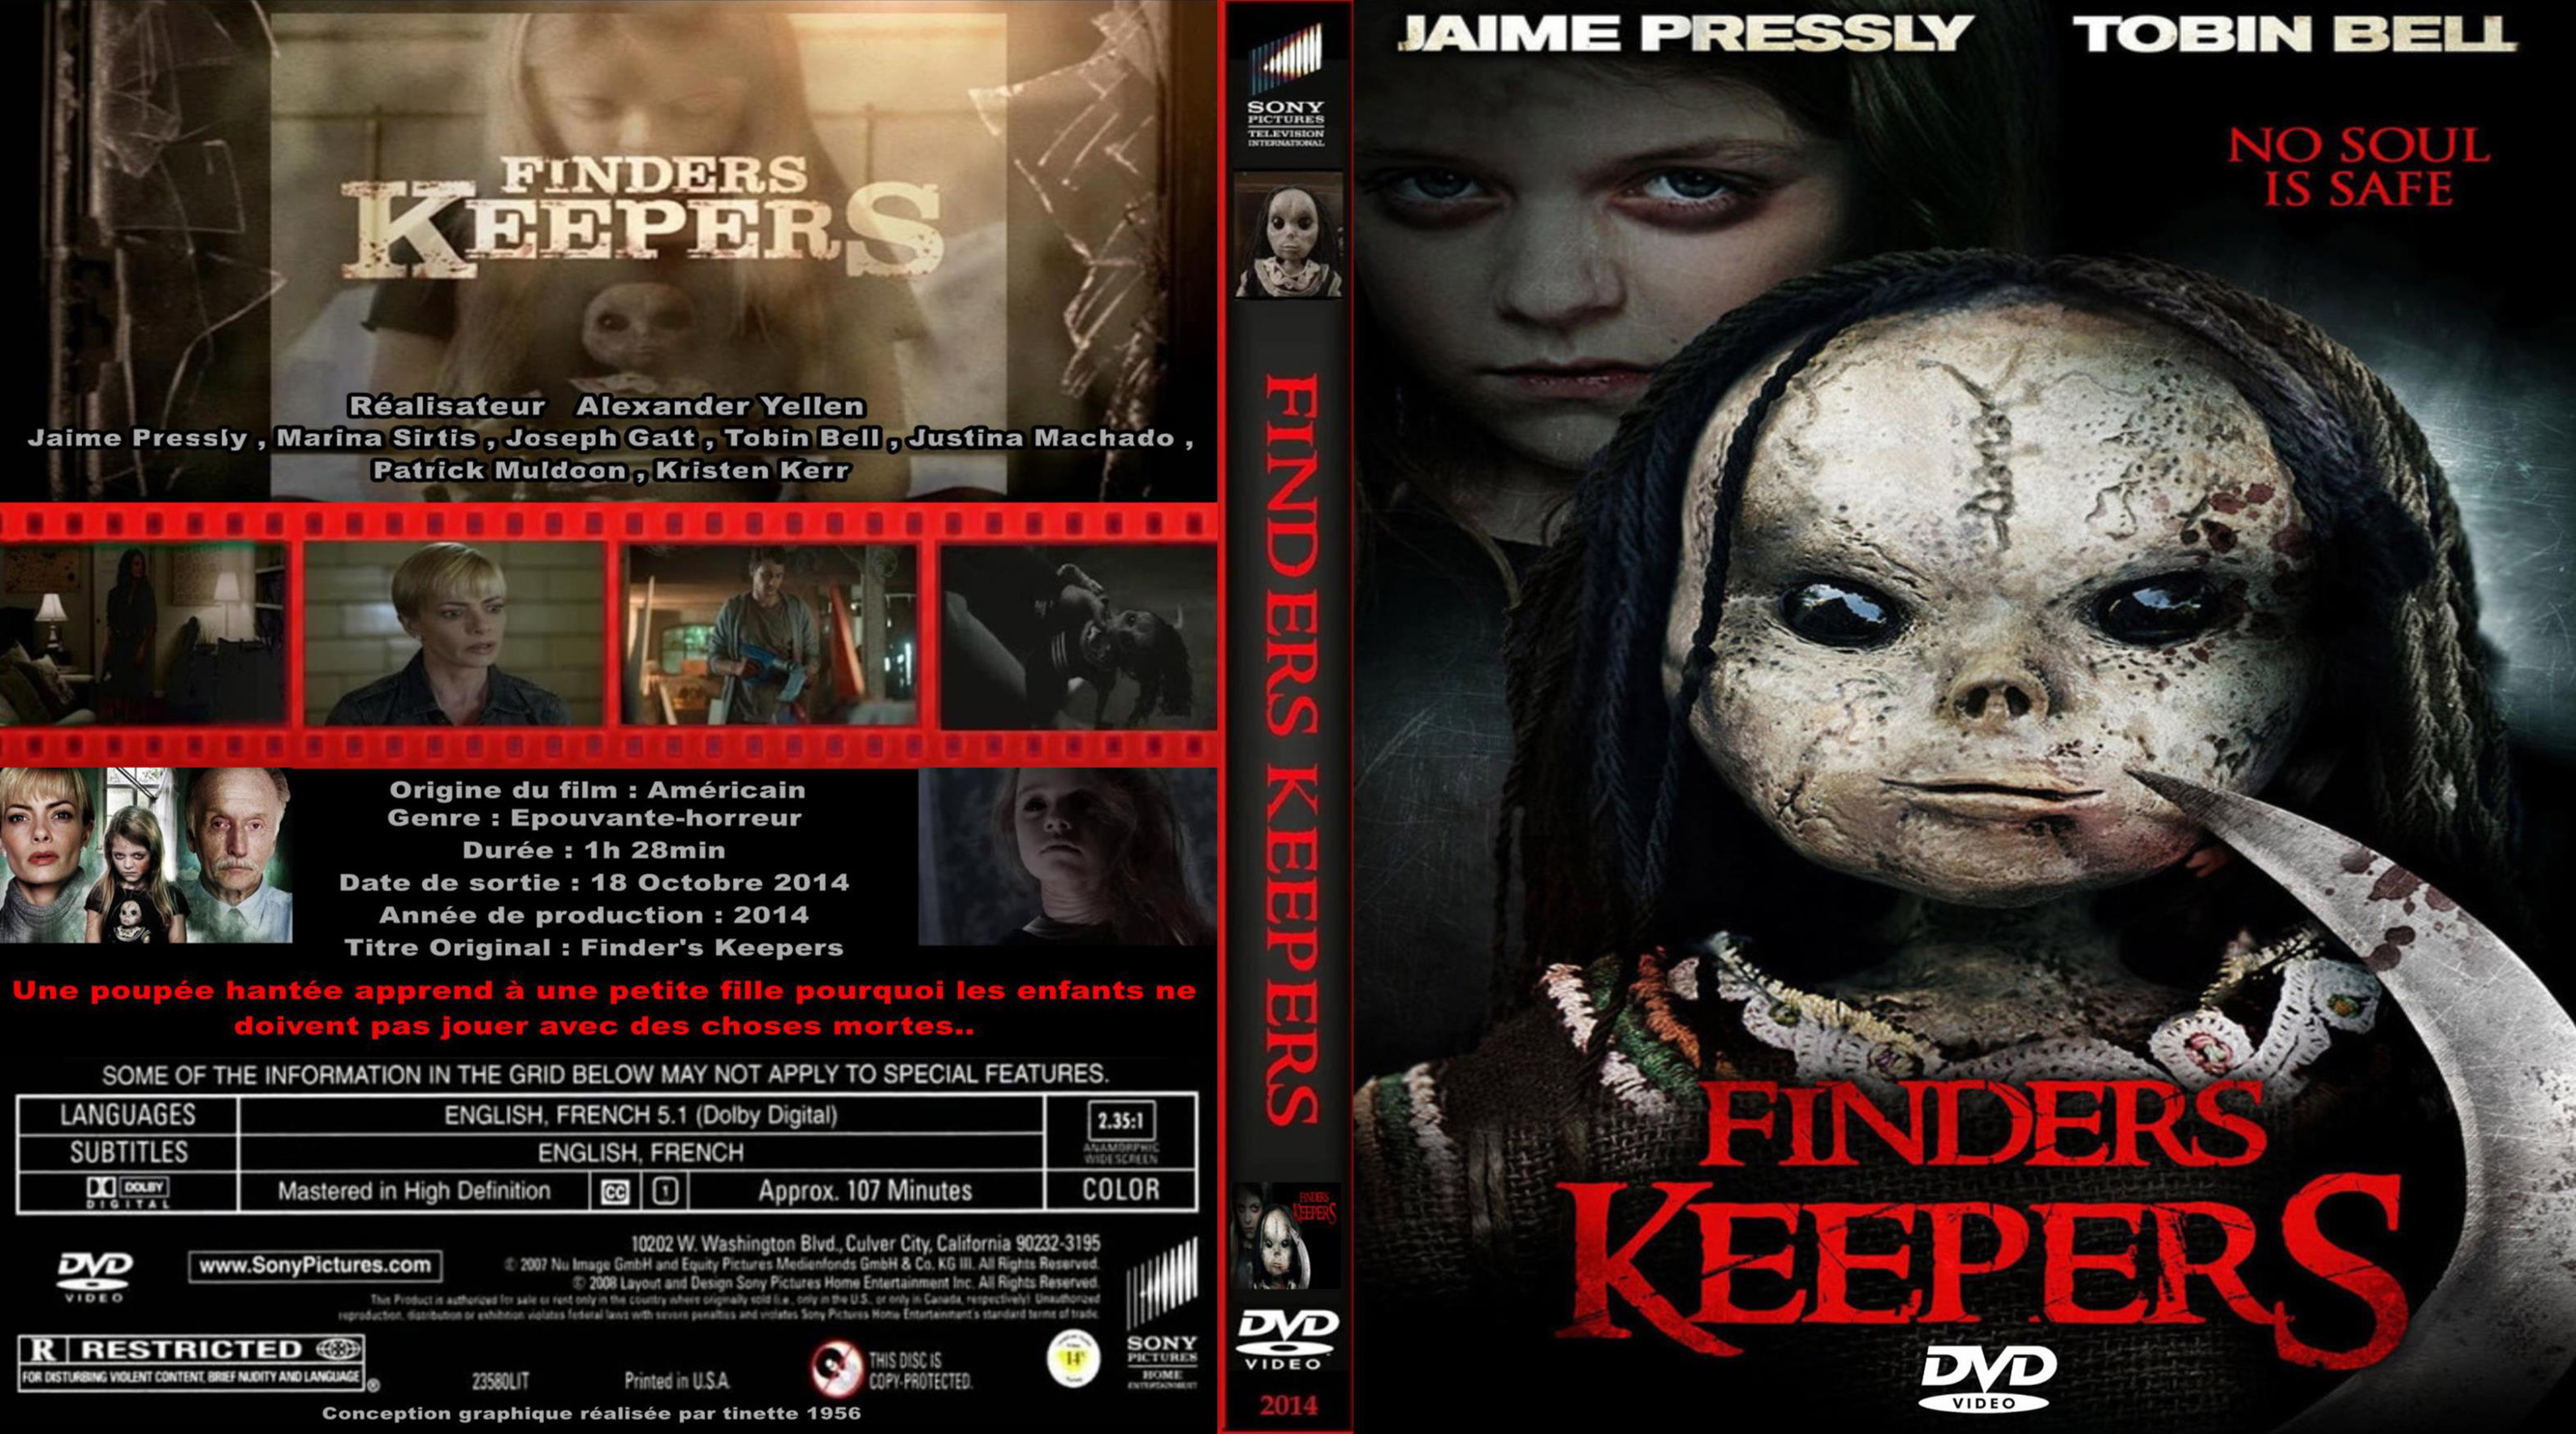 Jaquette DVD Finders keepers custom.